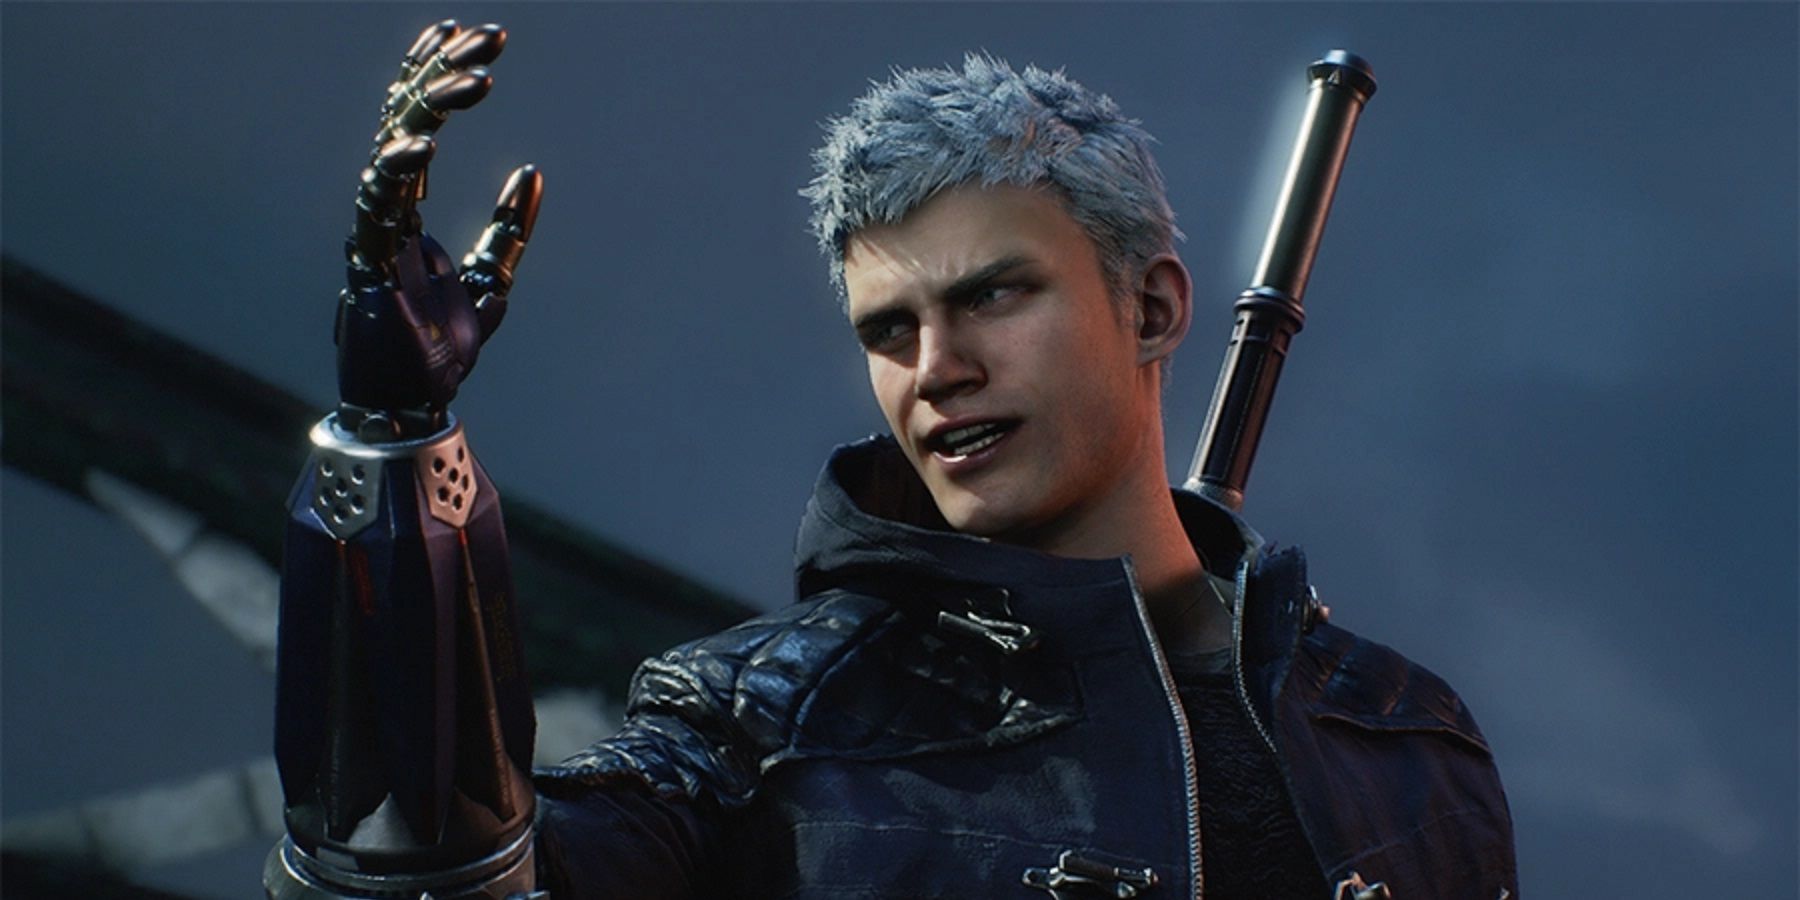 Nero from Devil May Cry 5 holding up his metal arm.